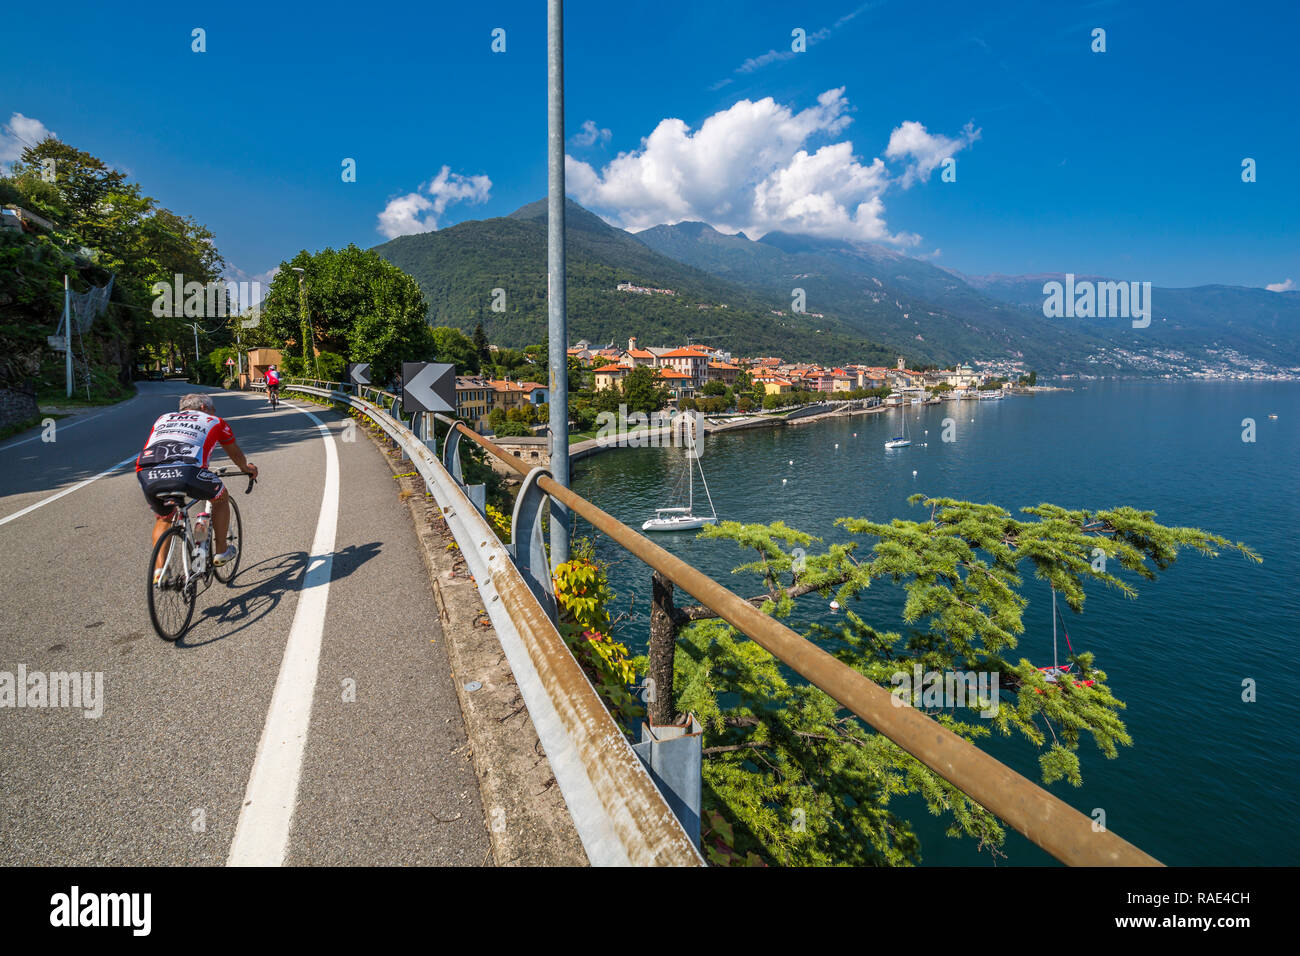 Cyclists on road leading to Cannobio and Lake Maggiore, Lake Maggiore, Piedmont, Italian Lakes, Italy, Europe Stock Photo